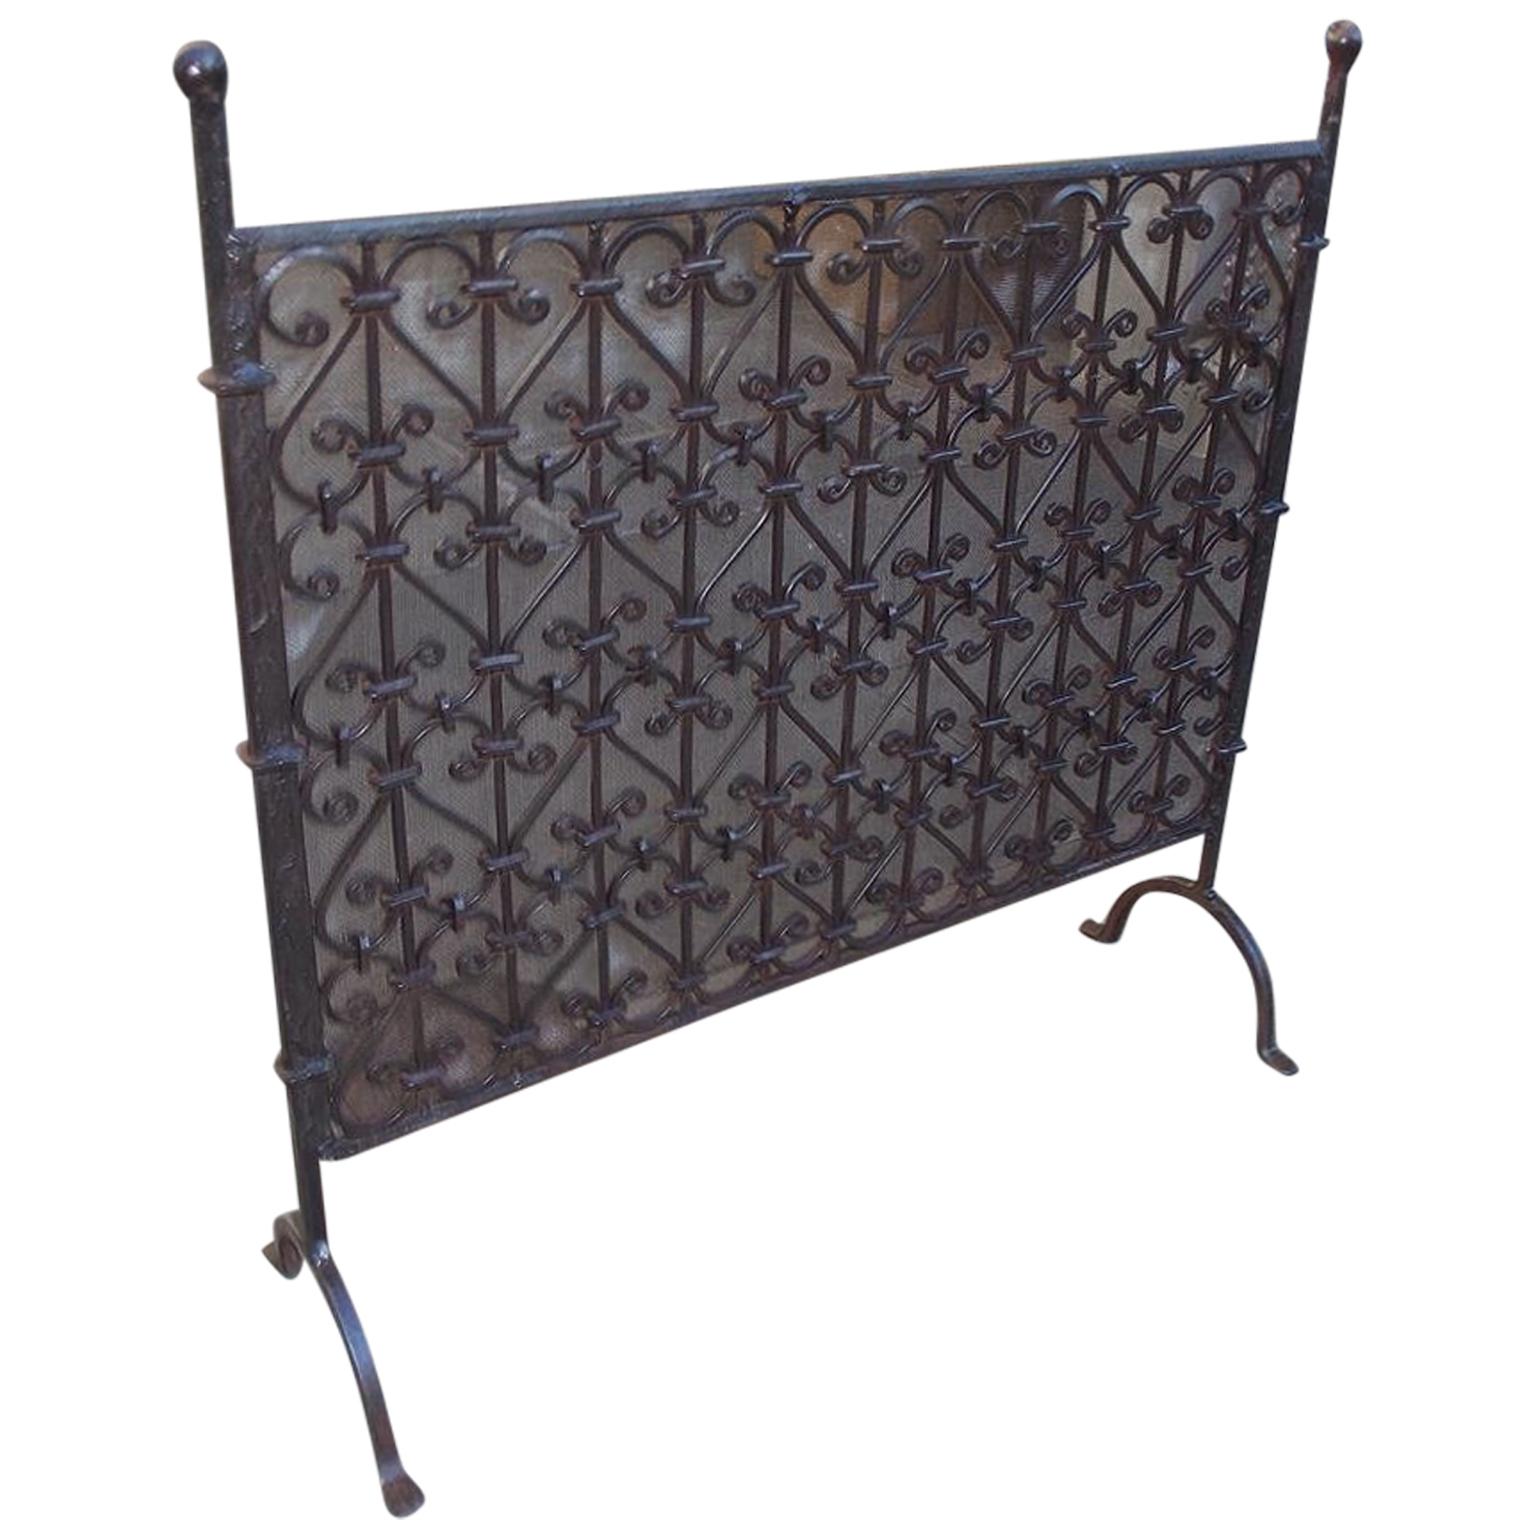 American Wrought Iron Ball Top Freestanding Fire Place Screen, Circa 1820 For Sale